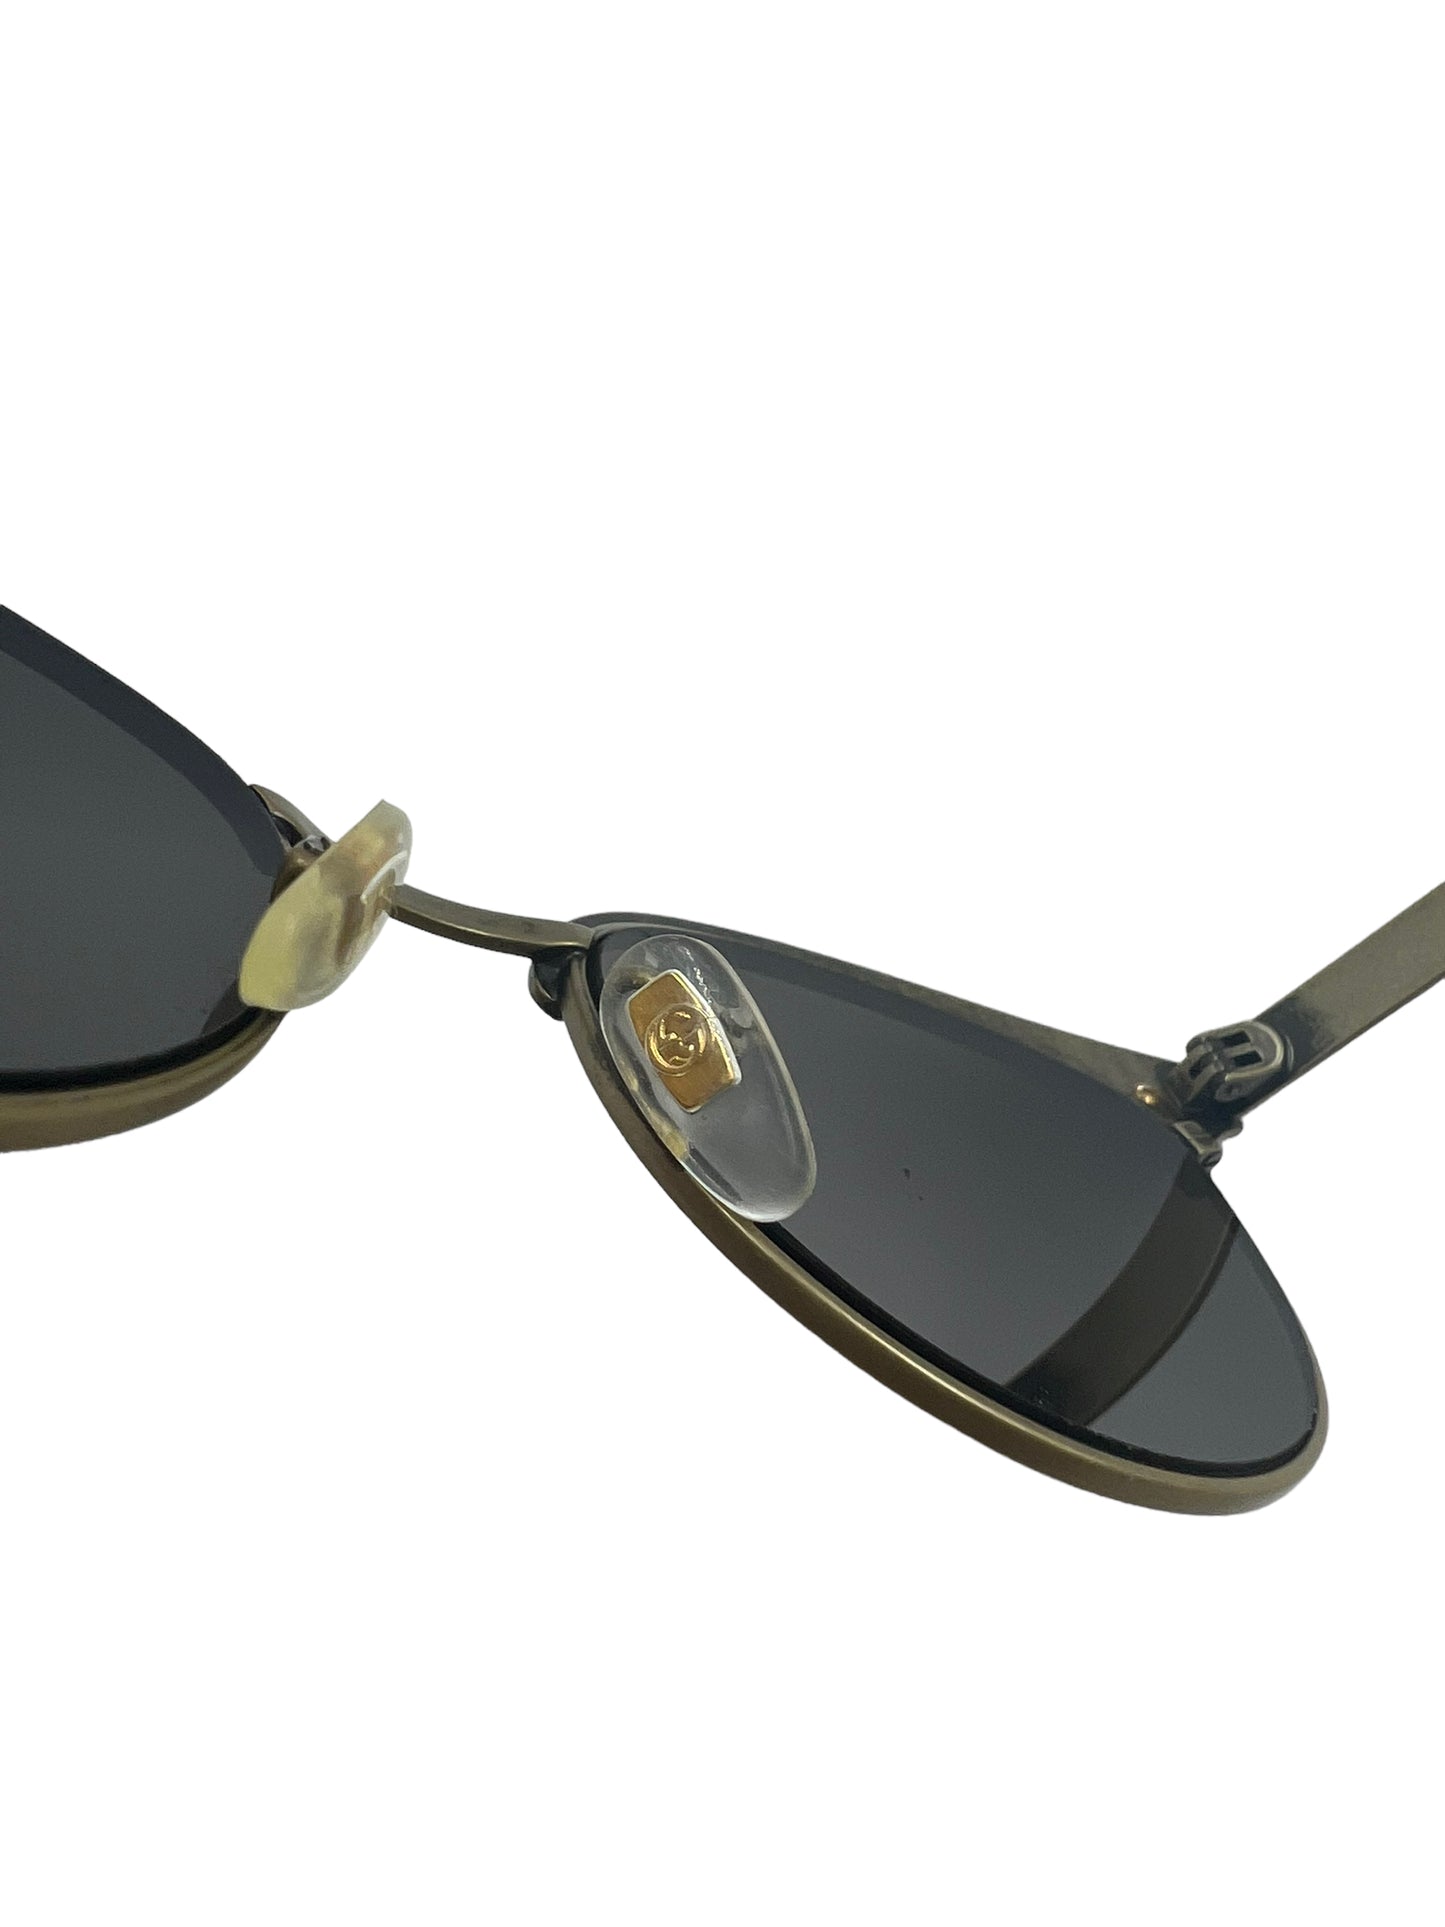 Gucci GG0220S Gold Cat Eye Engraved Sunglasses